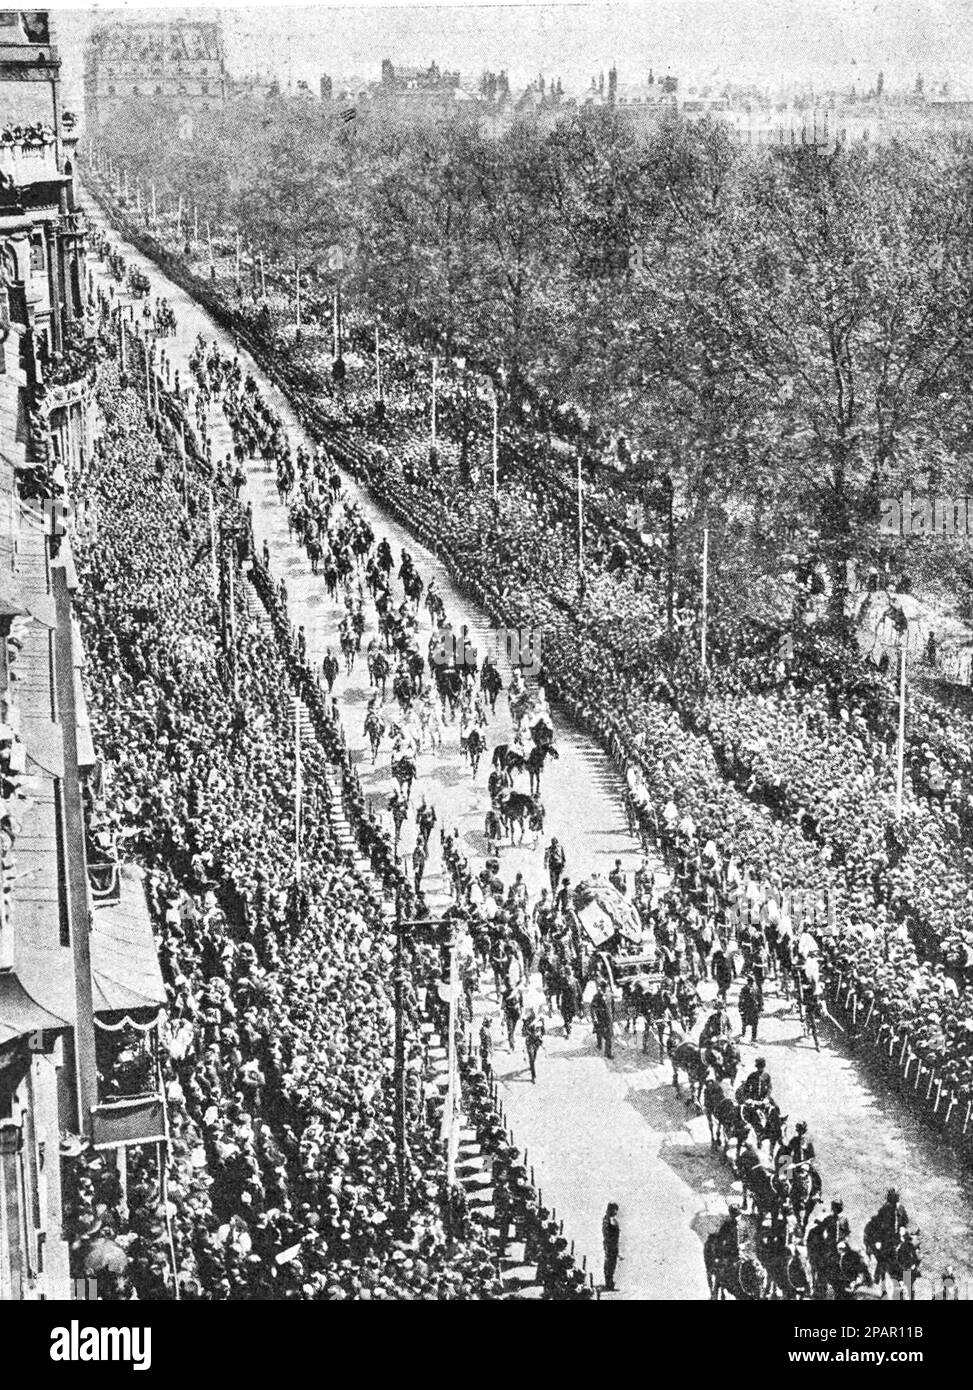 Funeral of King Edward VII in 1910. General view of the funeral procession. Photo from 1910. Stock Photo